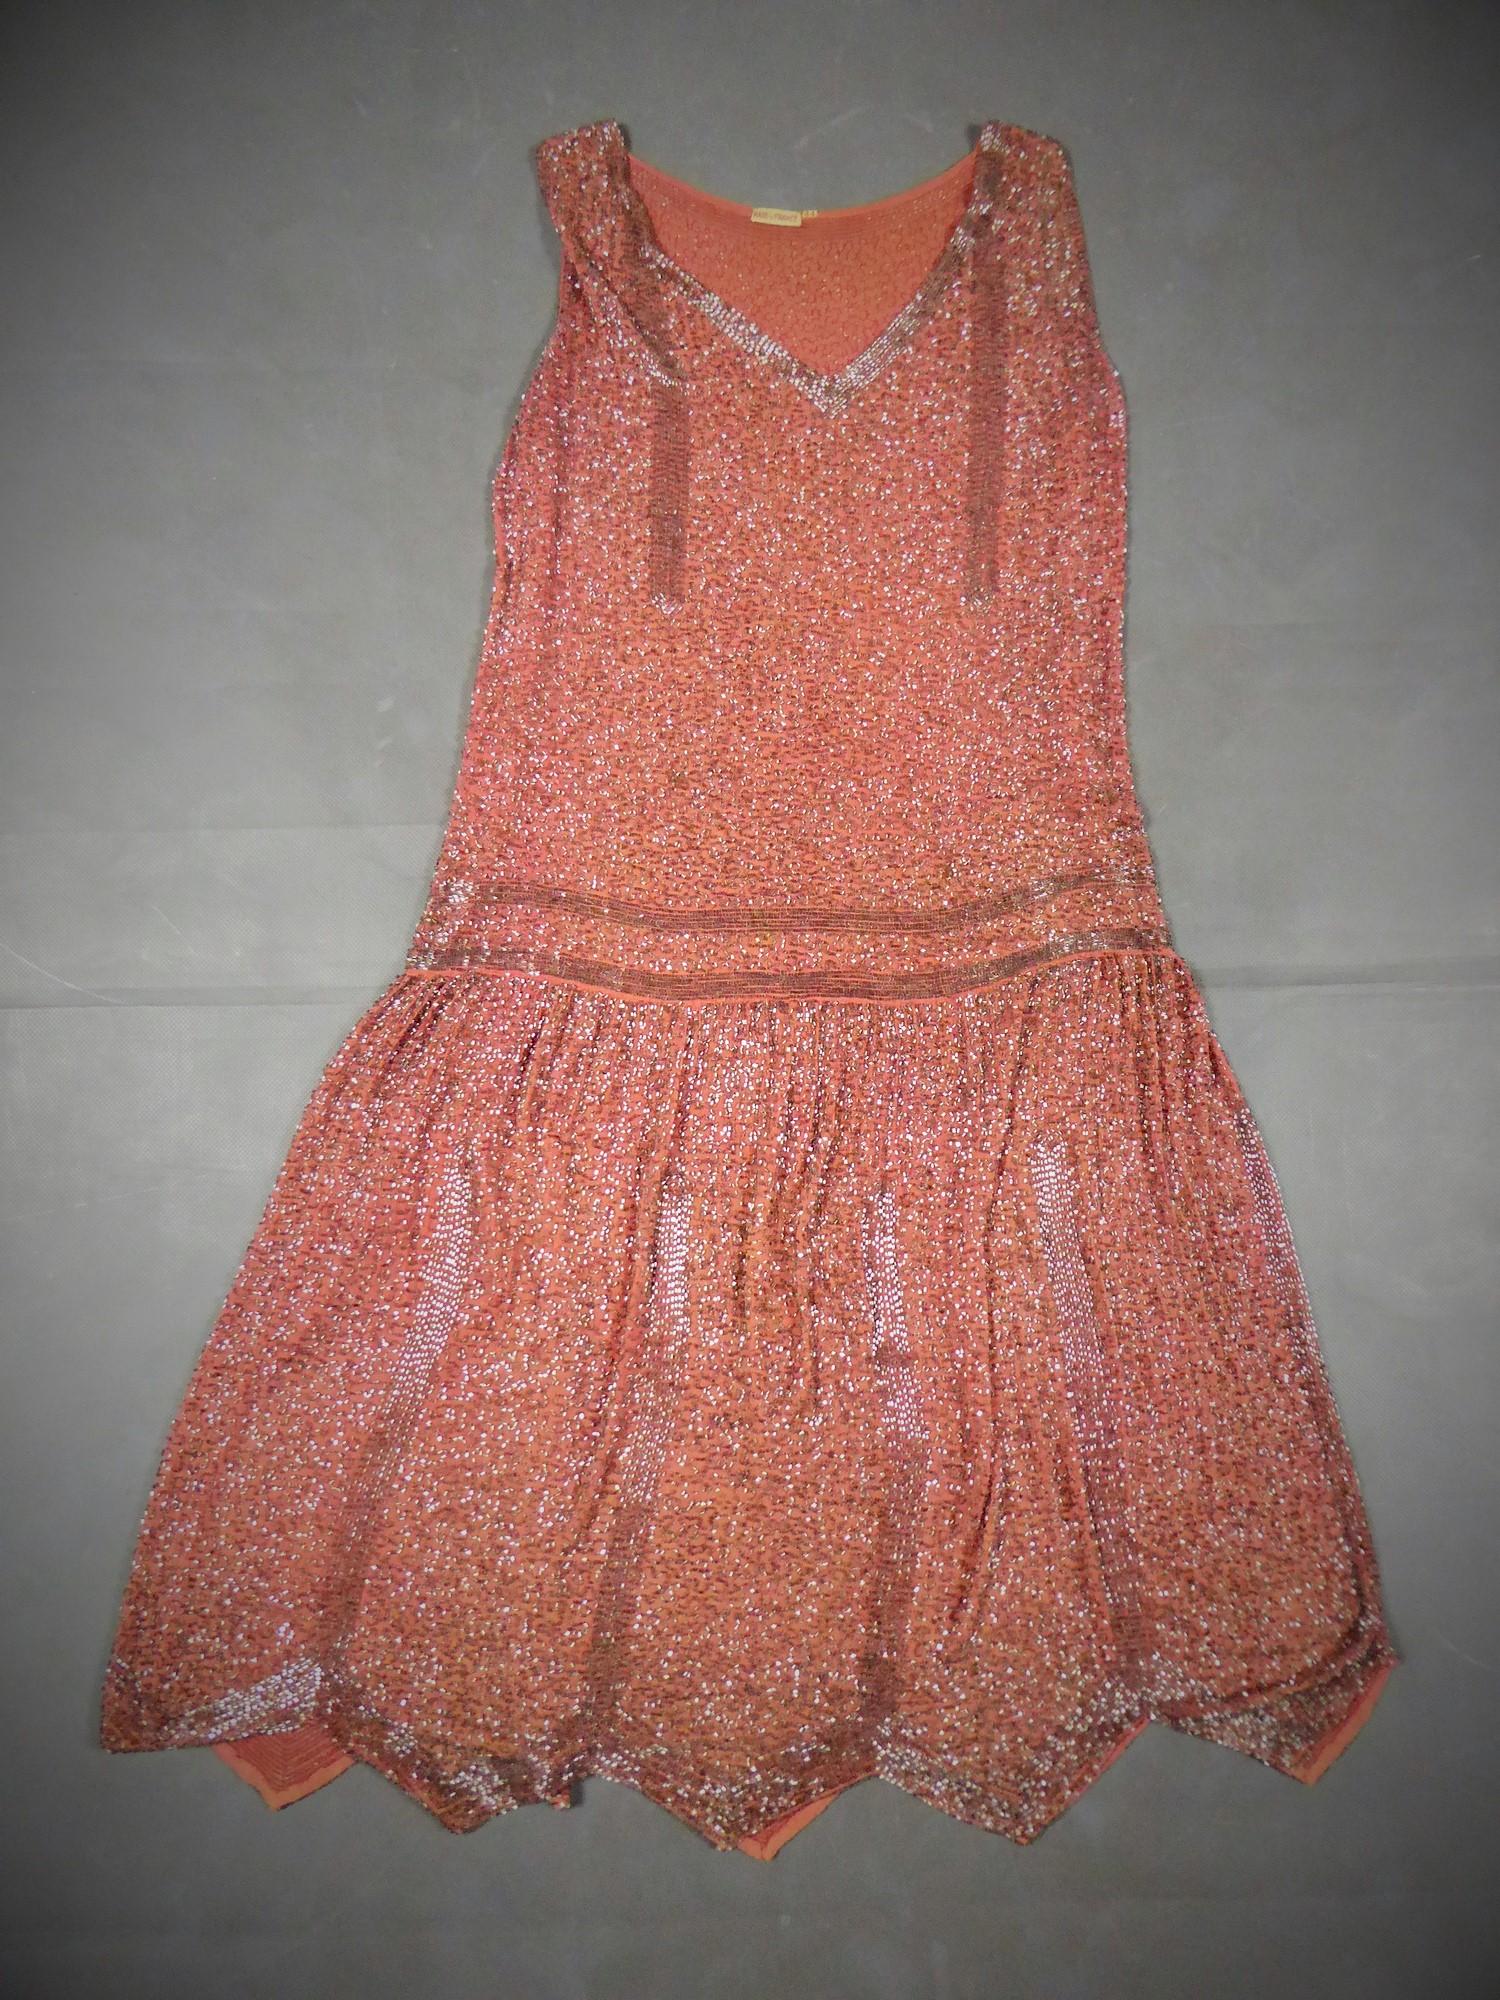 Circa 1925
France

Flapper dress in pale rose cotton Chiffon embroidered with translucent tubular glass beads dating from the French Années Folles. Embroidered and vermiculated background gives a sablé effect. Loose dress with straight cut and low